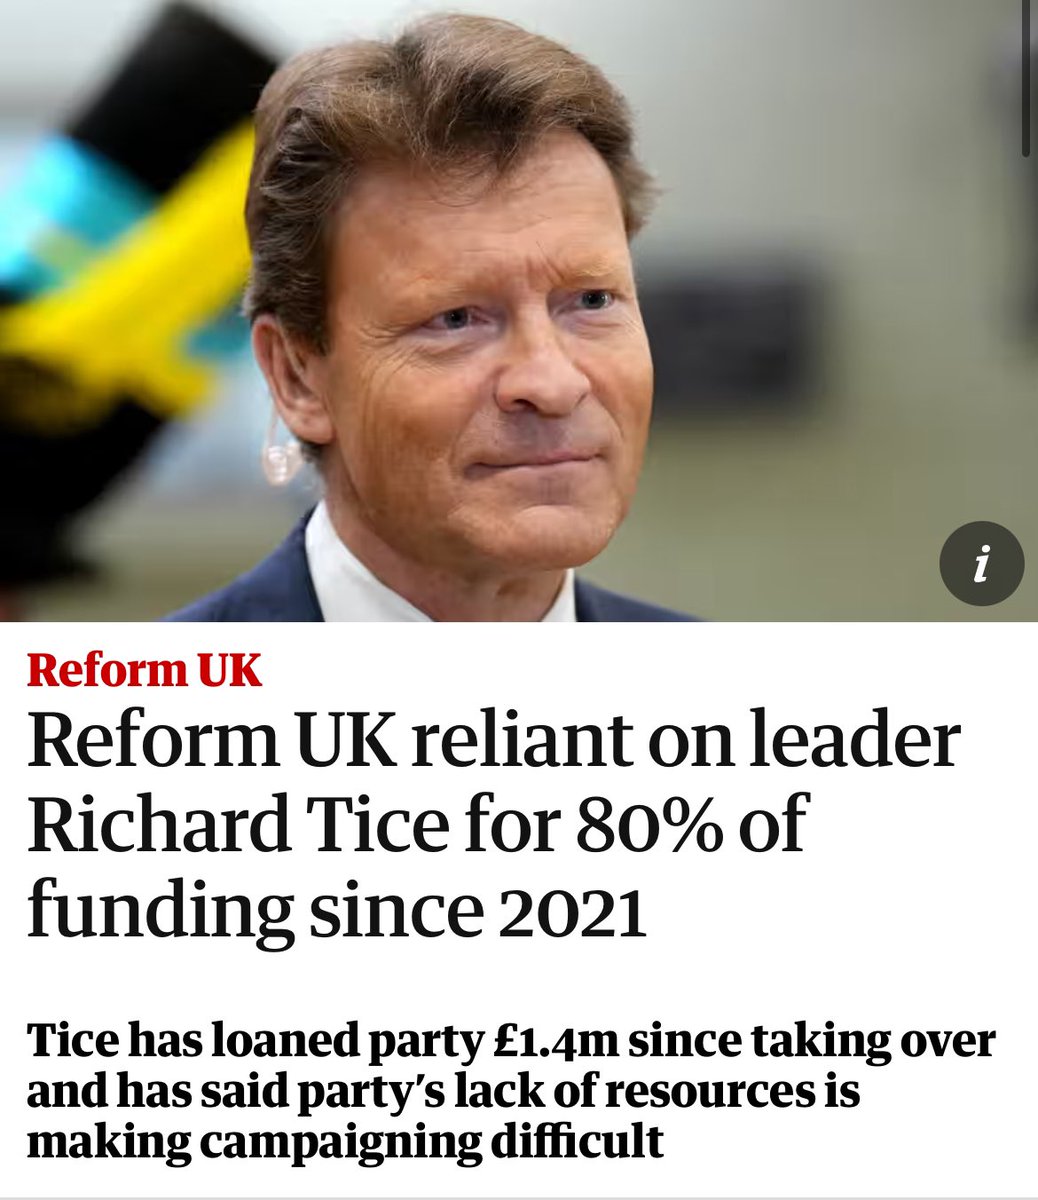 every time you see Reform discussed on tv, remember that it’s all just one man pumping money into a rogue rightwing project. and when you much more rarely see a Green on tv, that’s the result of half a century of hard graft, grassroots support, & actual electoral success.